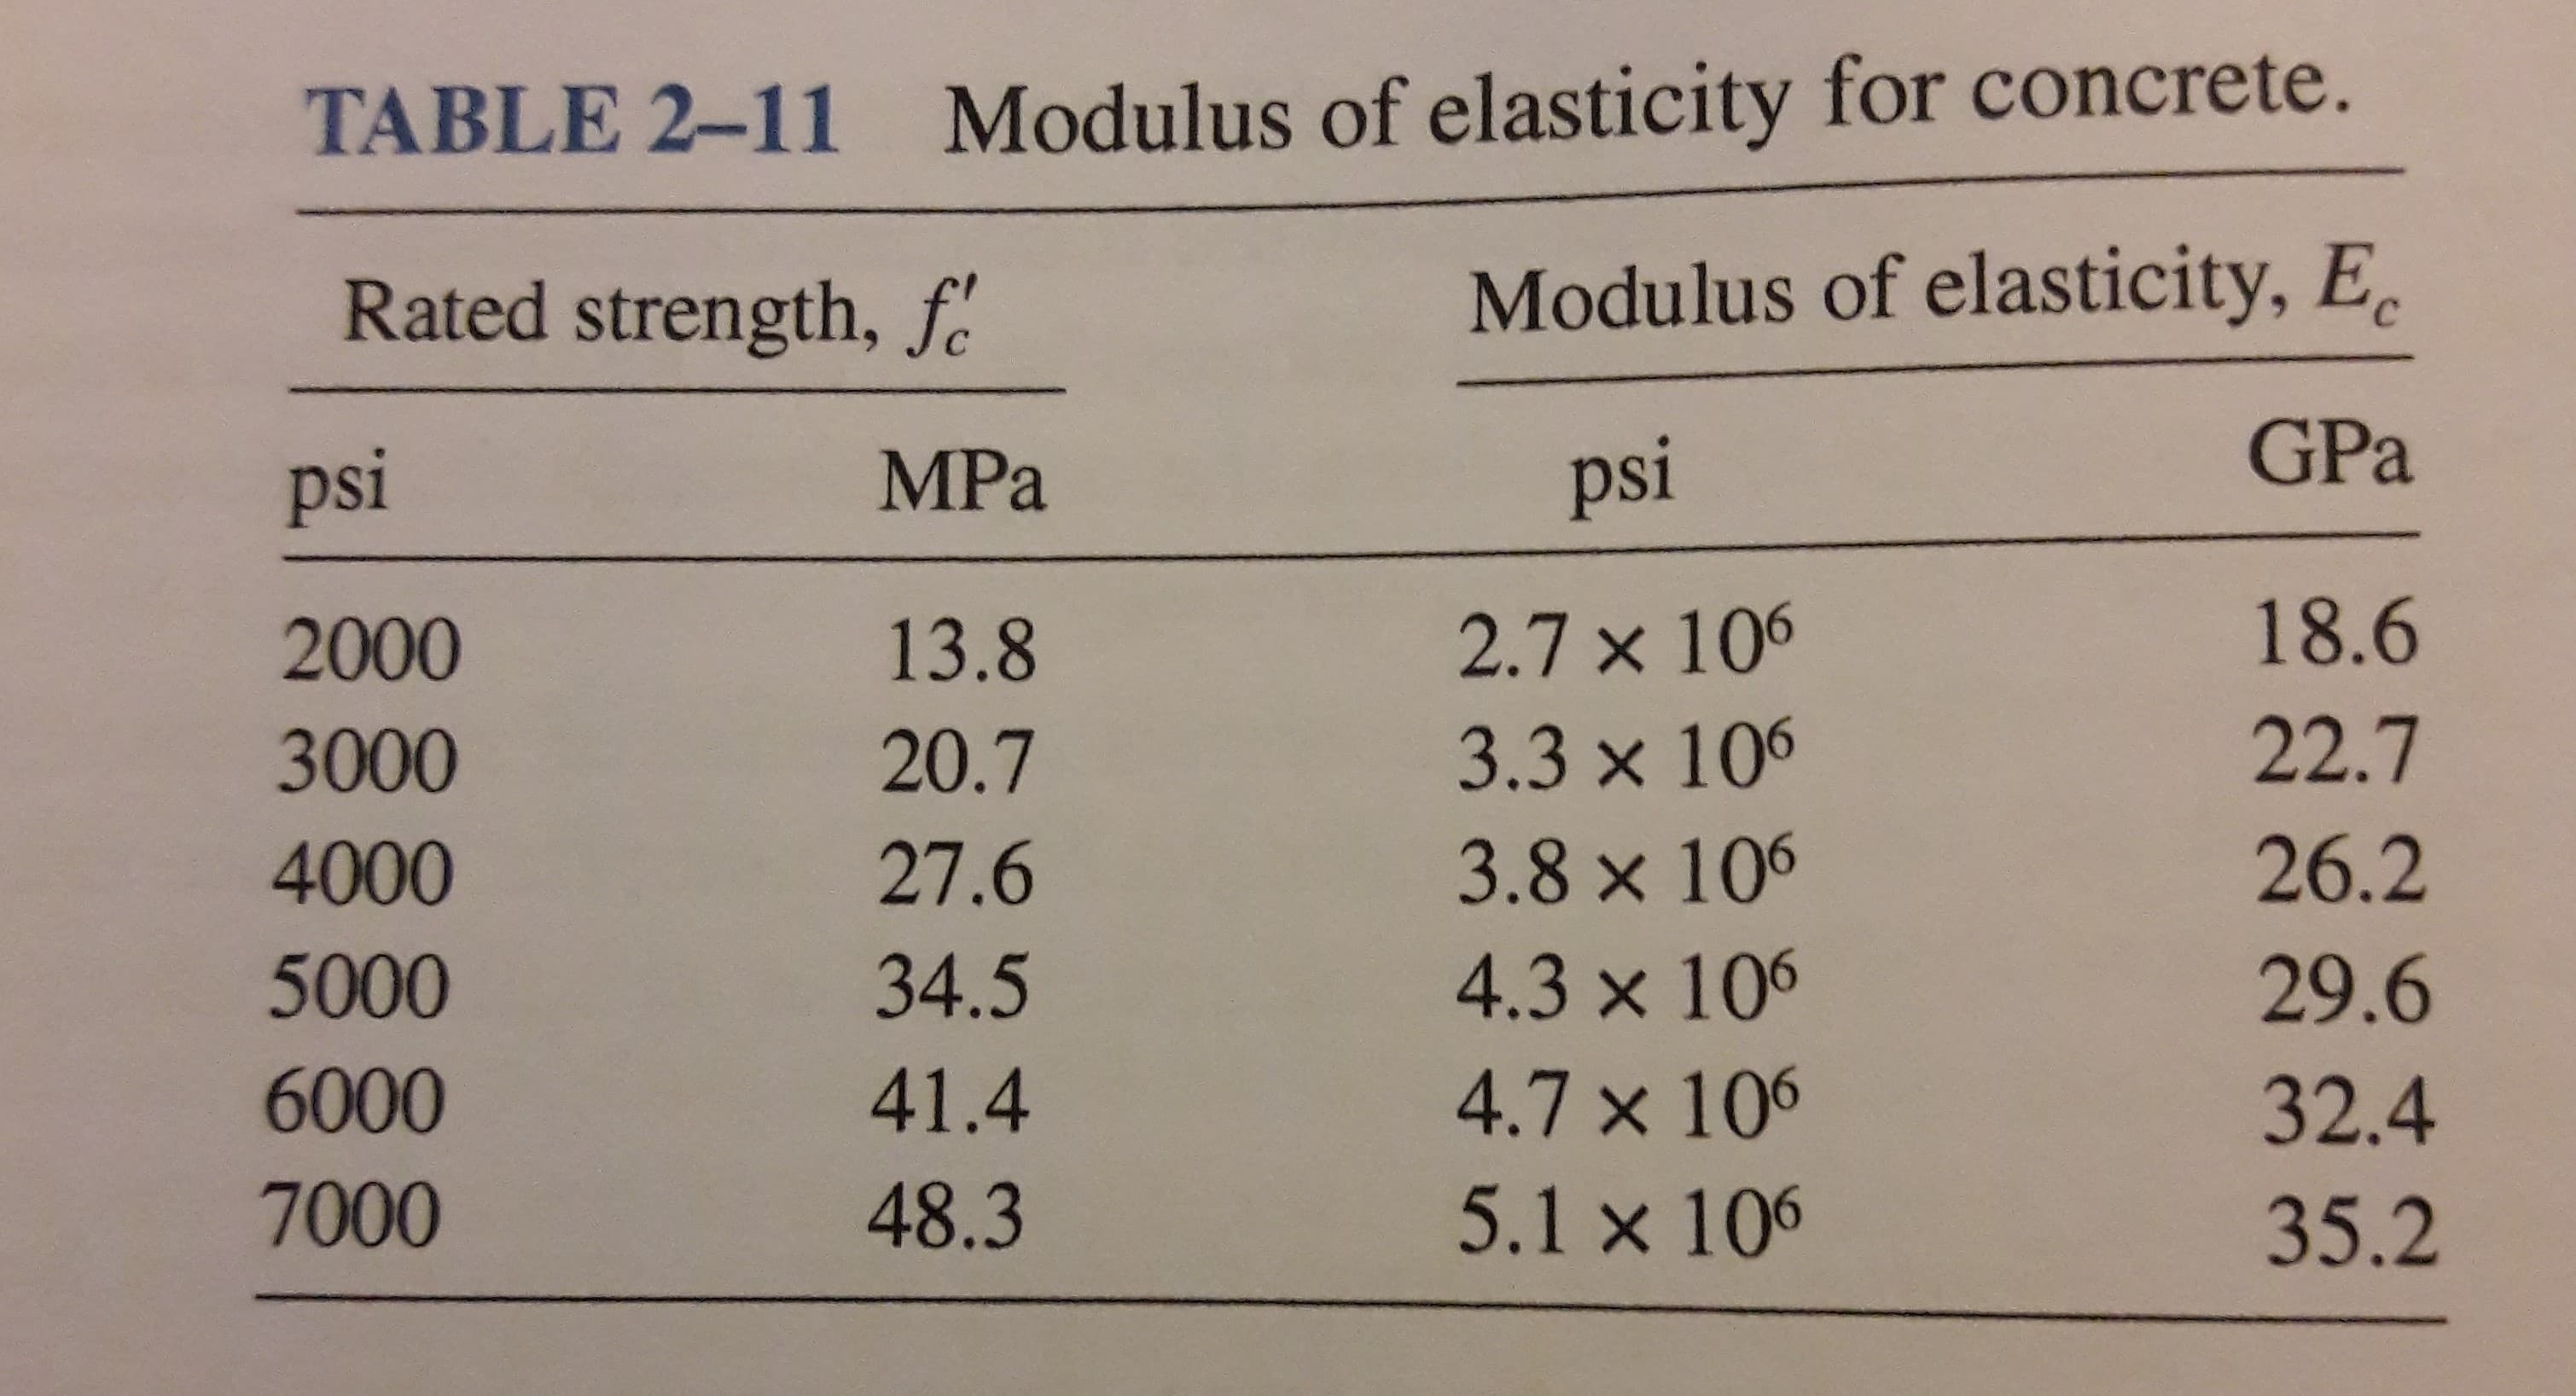 Modulus of elasticity for concrete.
TABLE 2-11
Modulus of elasticity, E.
Rated strength, fe
GPa
psi
psi
MPa
18.6
2.7 × 106
13.8
2000
22.7
3.3x106
3000
20.7
26.2
3.8x106
4000
27.6
4.3 x 106
29.6
5000
34.5
6000
4.7 x 106
41.4
32.4
7000
48.3
5.1 x 106
35.2
